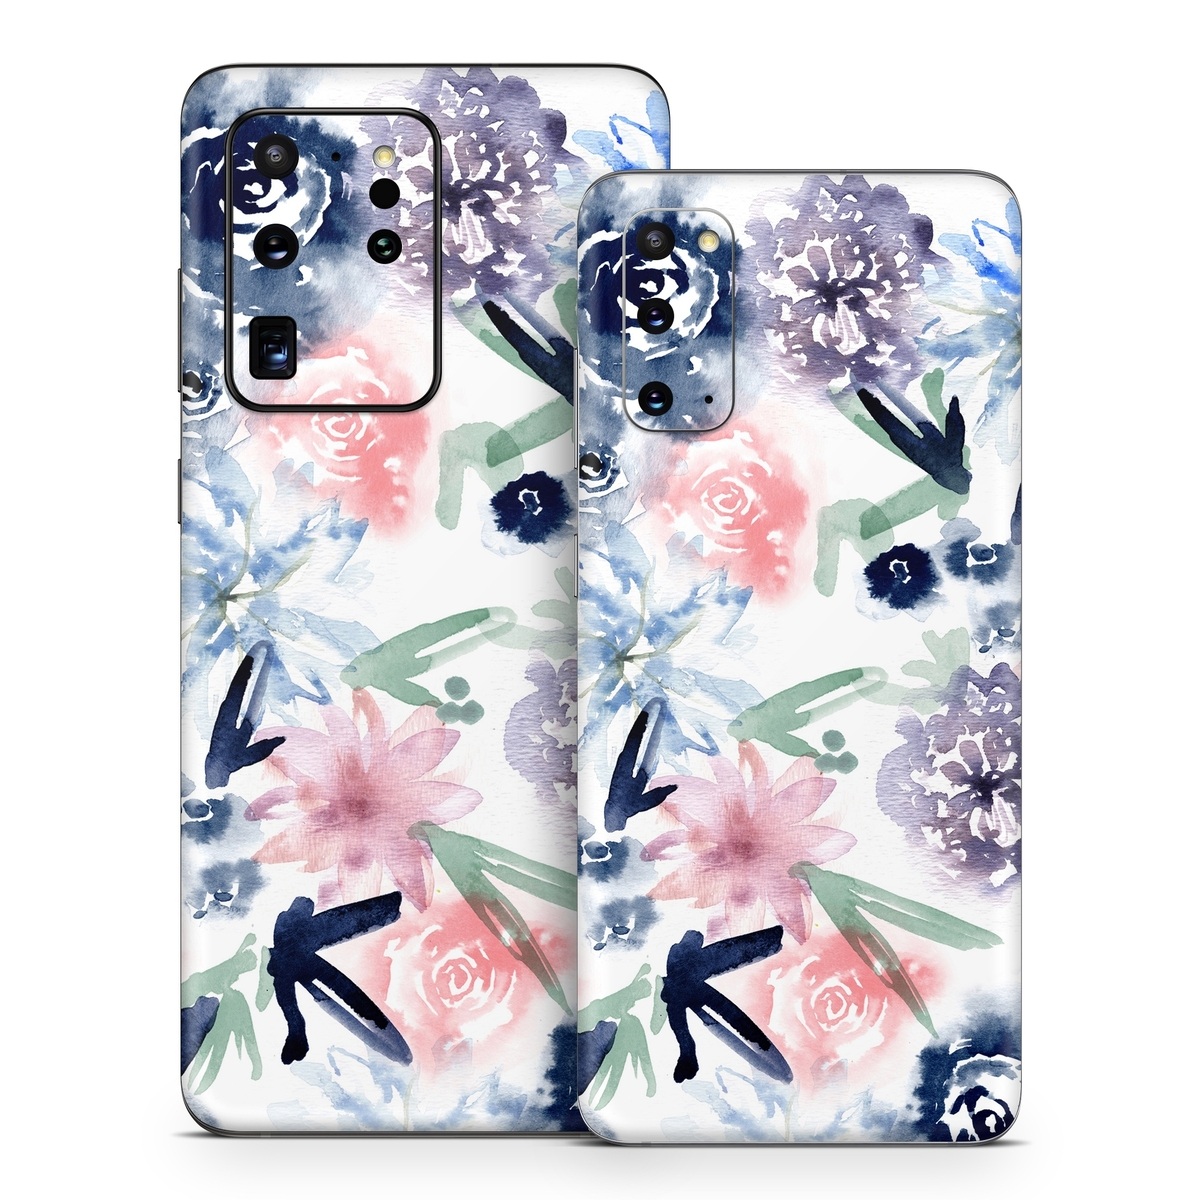 Samsung Galaxy S20 Series Skin design of Pattern, Graphic design, Design, Floral design, Plant, Flower, Illustration, with white, blue, purple, green, pink colors